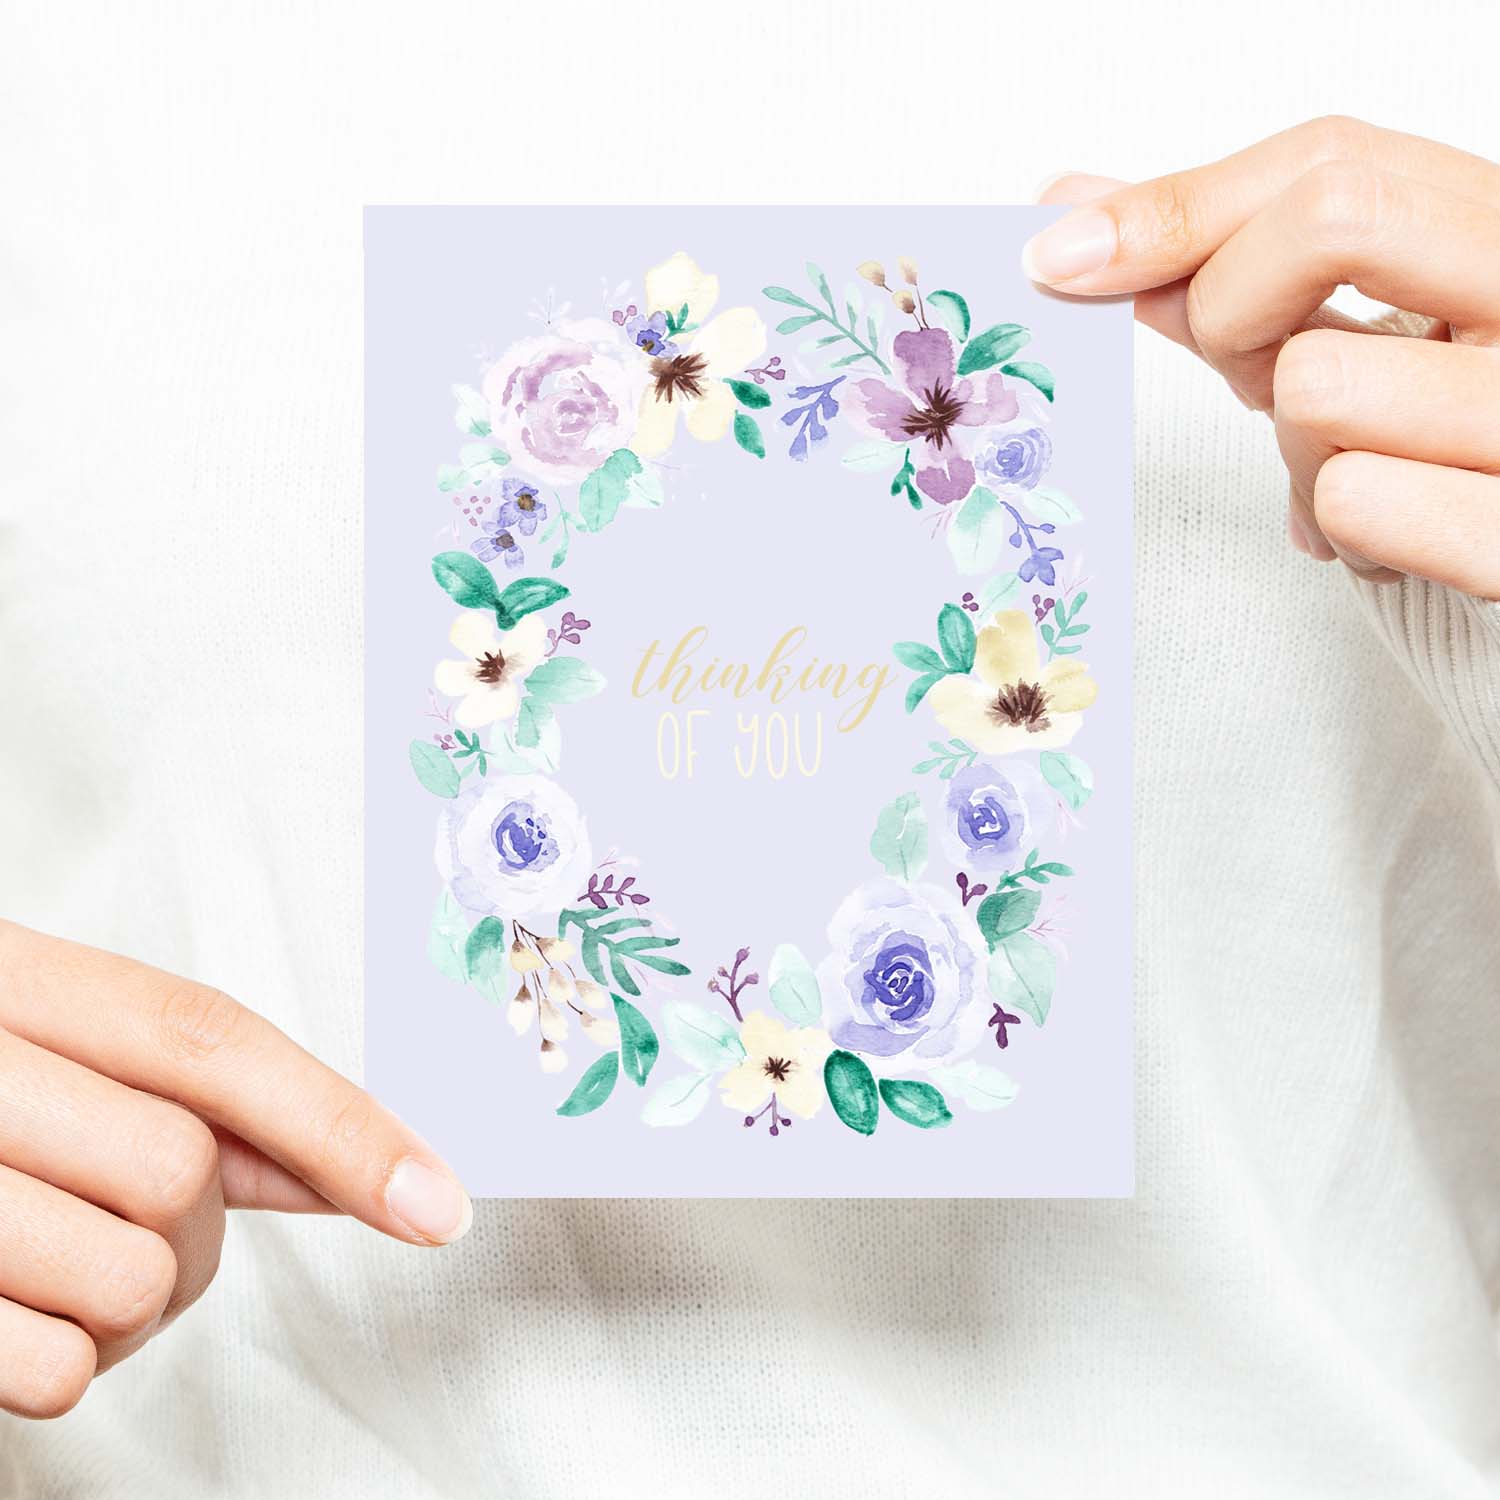 watercolor wild flower wreath on a friendship greeting card that says thinking of you in the center with a white A2 envelope shown with a woman in a white sweater holding card